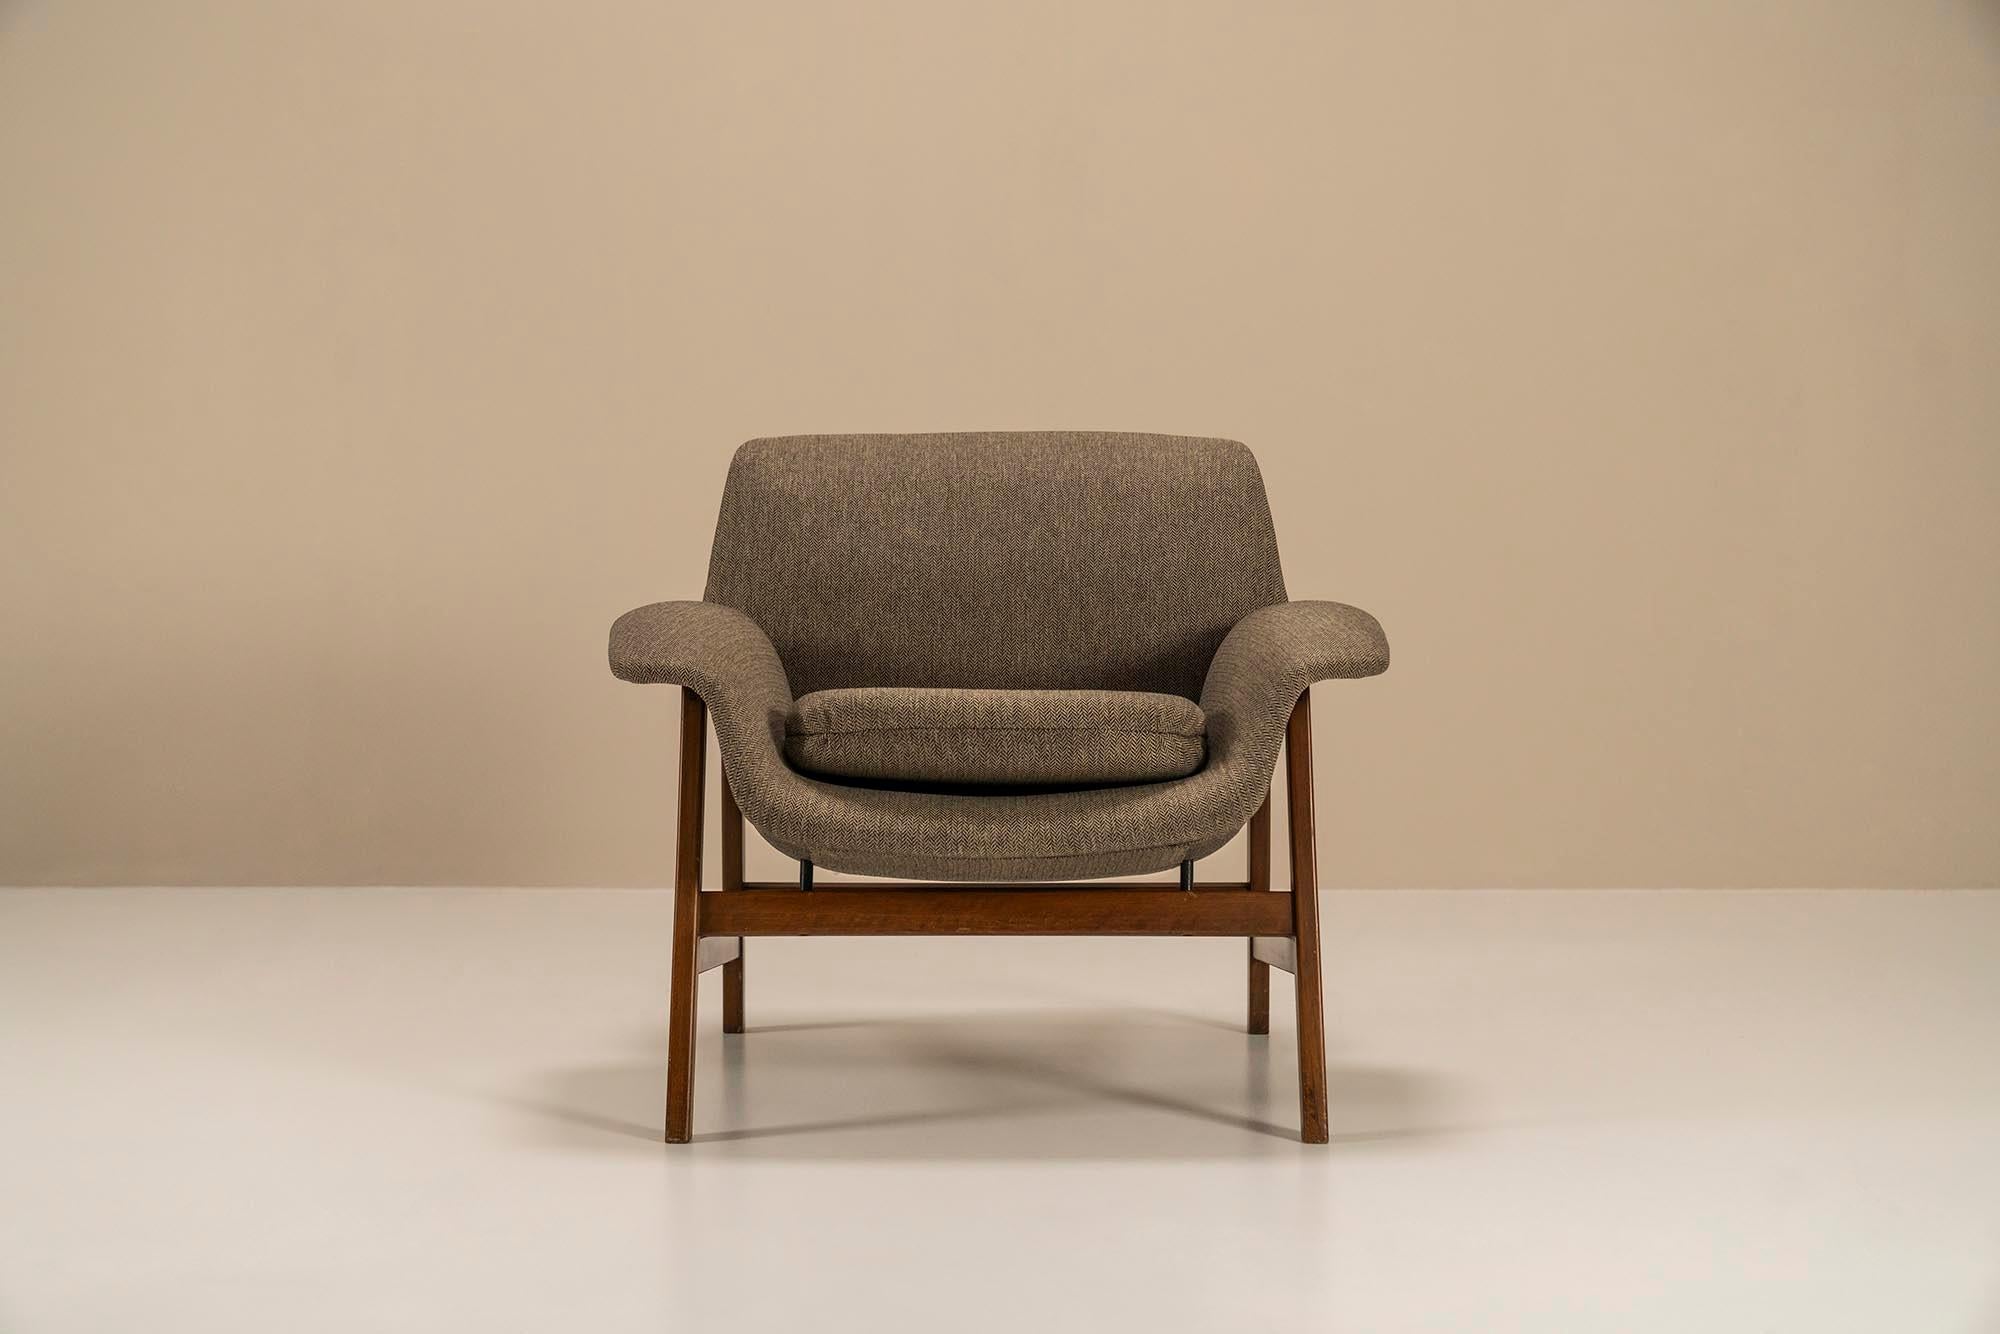 Lounge chair model 849 by Gianfranco Frattini for Cassina.Awarded the famous 